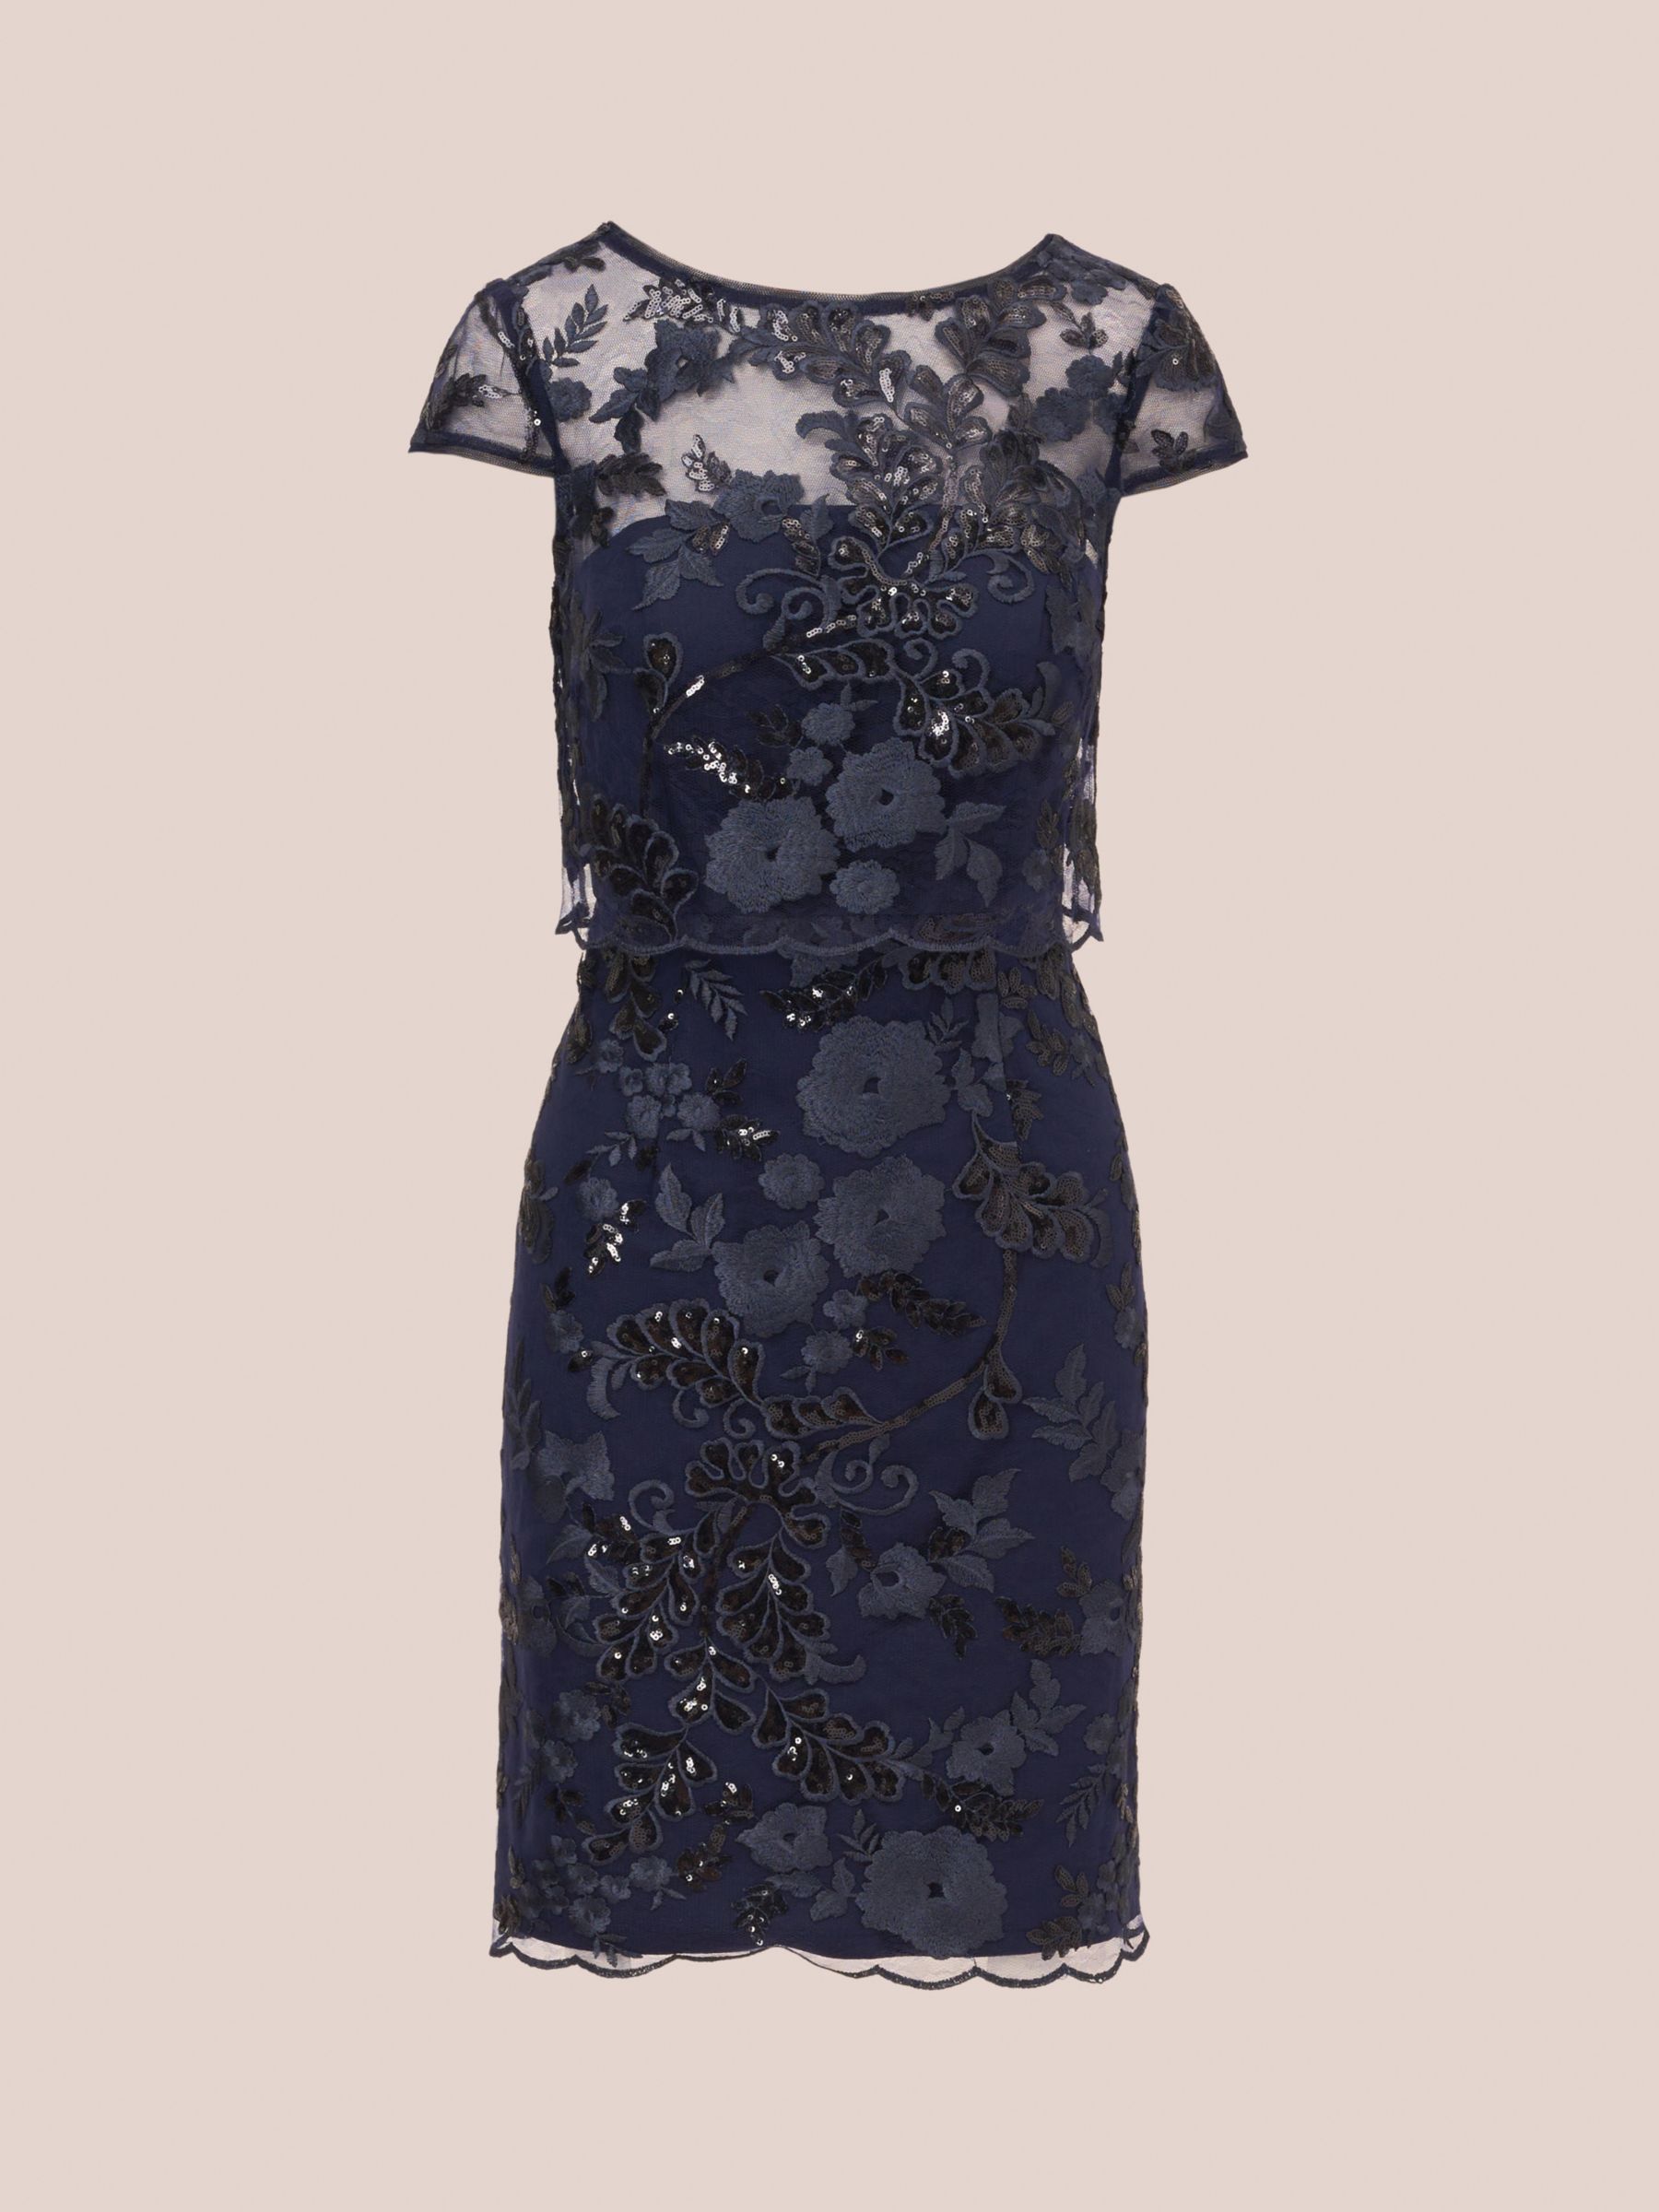 Buy Adrianna Papell Sequin Popover Mini Dress, Navy Online at johnlewis.com